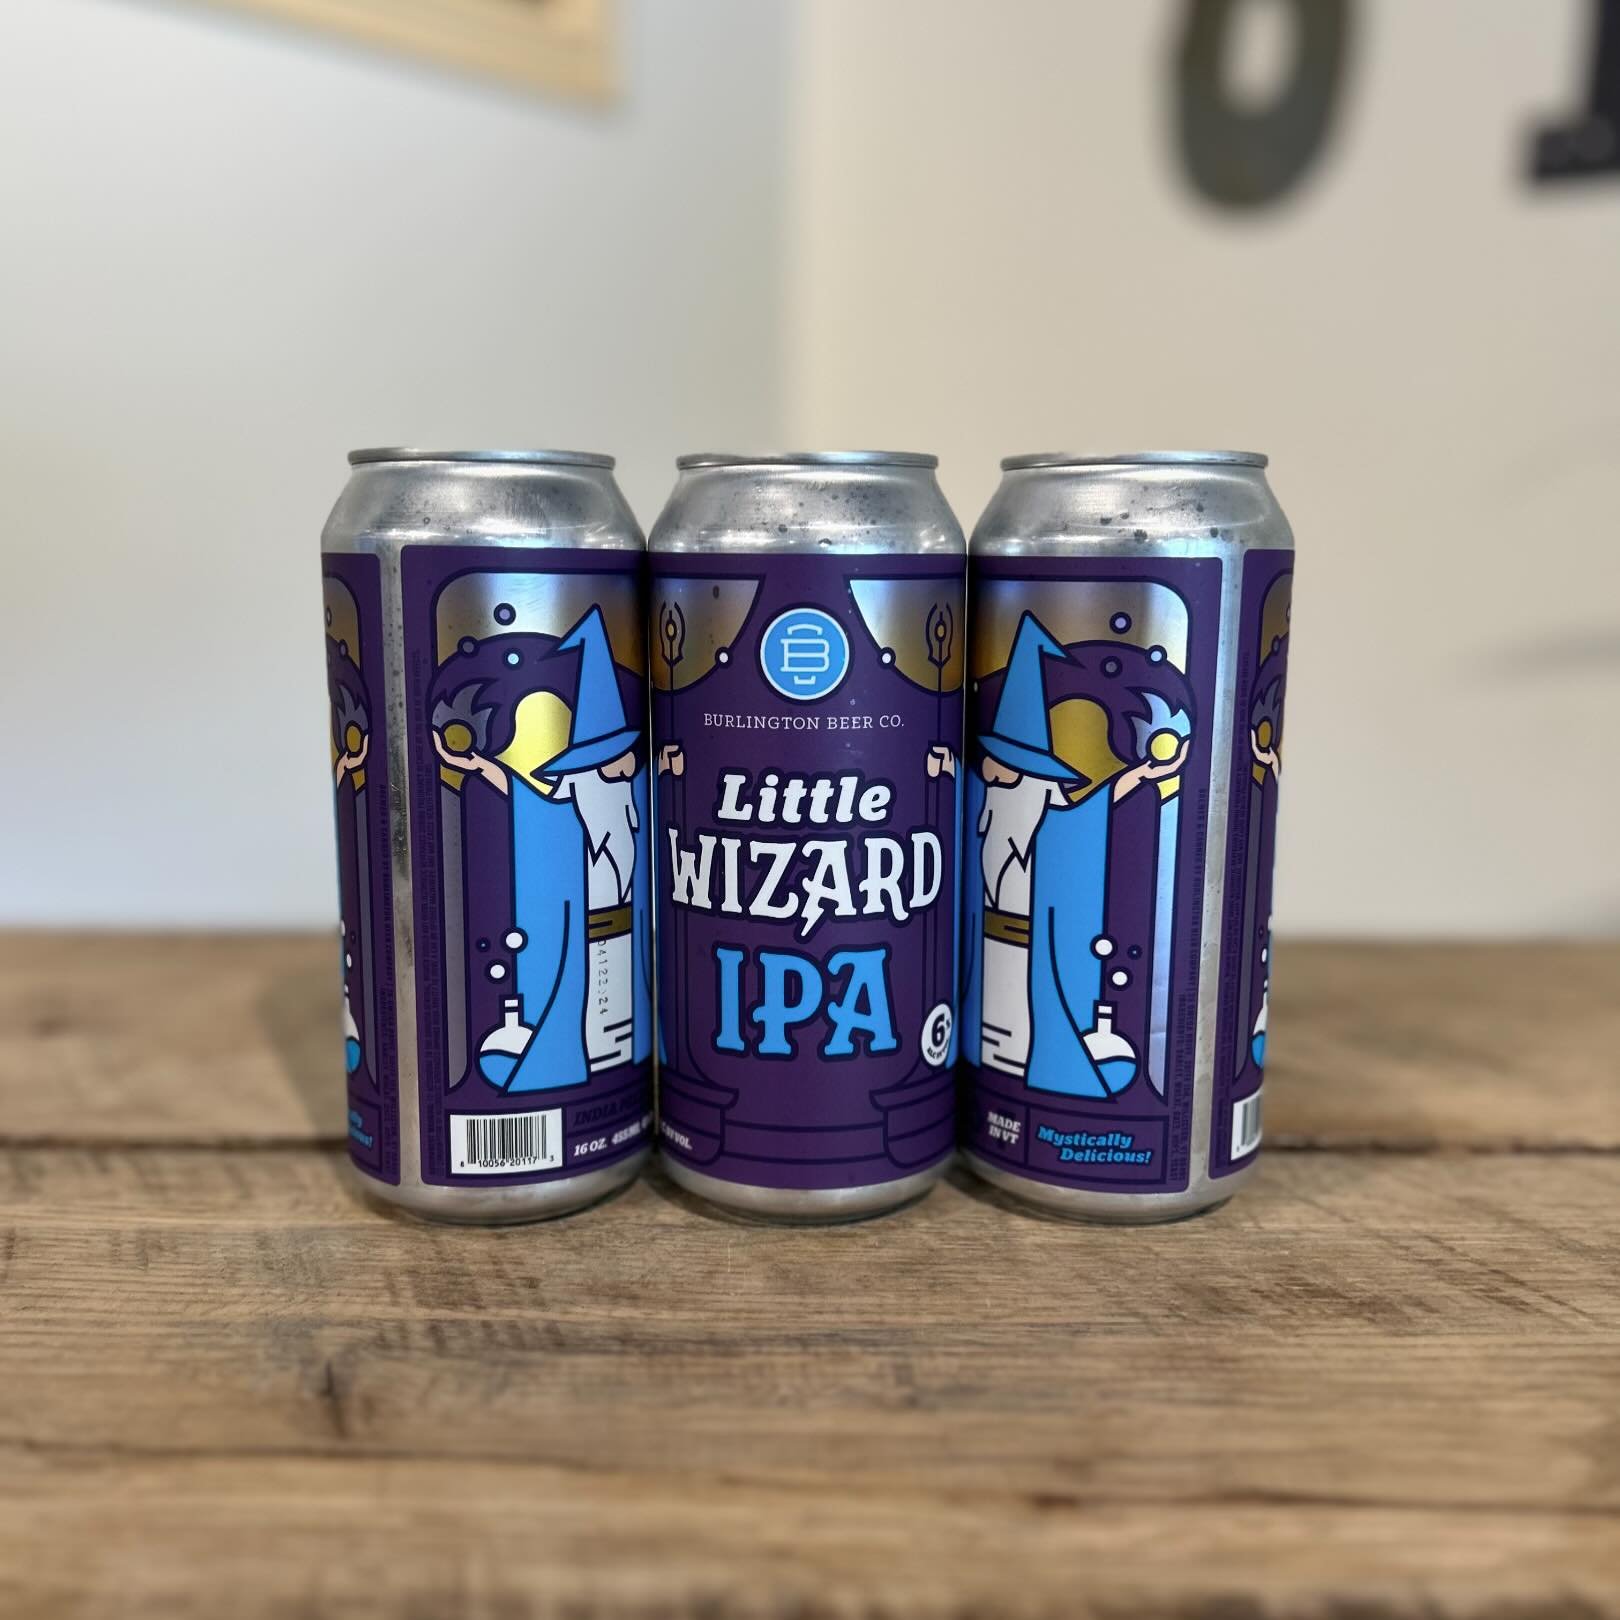 New from @burlingtonbeer #NowAvailable #SudburyCraftBeer #SudburyMA
&mdash;
Introducing Little Wizard&trade;, our Mystically Delicious!&trade; new IPA that distills the magic of our acclaimed Double IPA &lsquo;It&rsquo;s Complicated Being a Wizard&rs